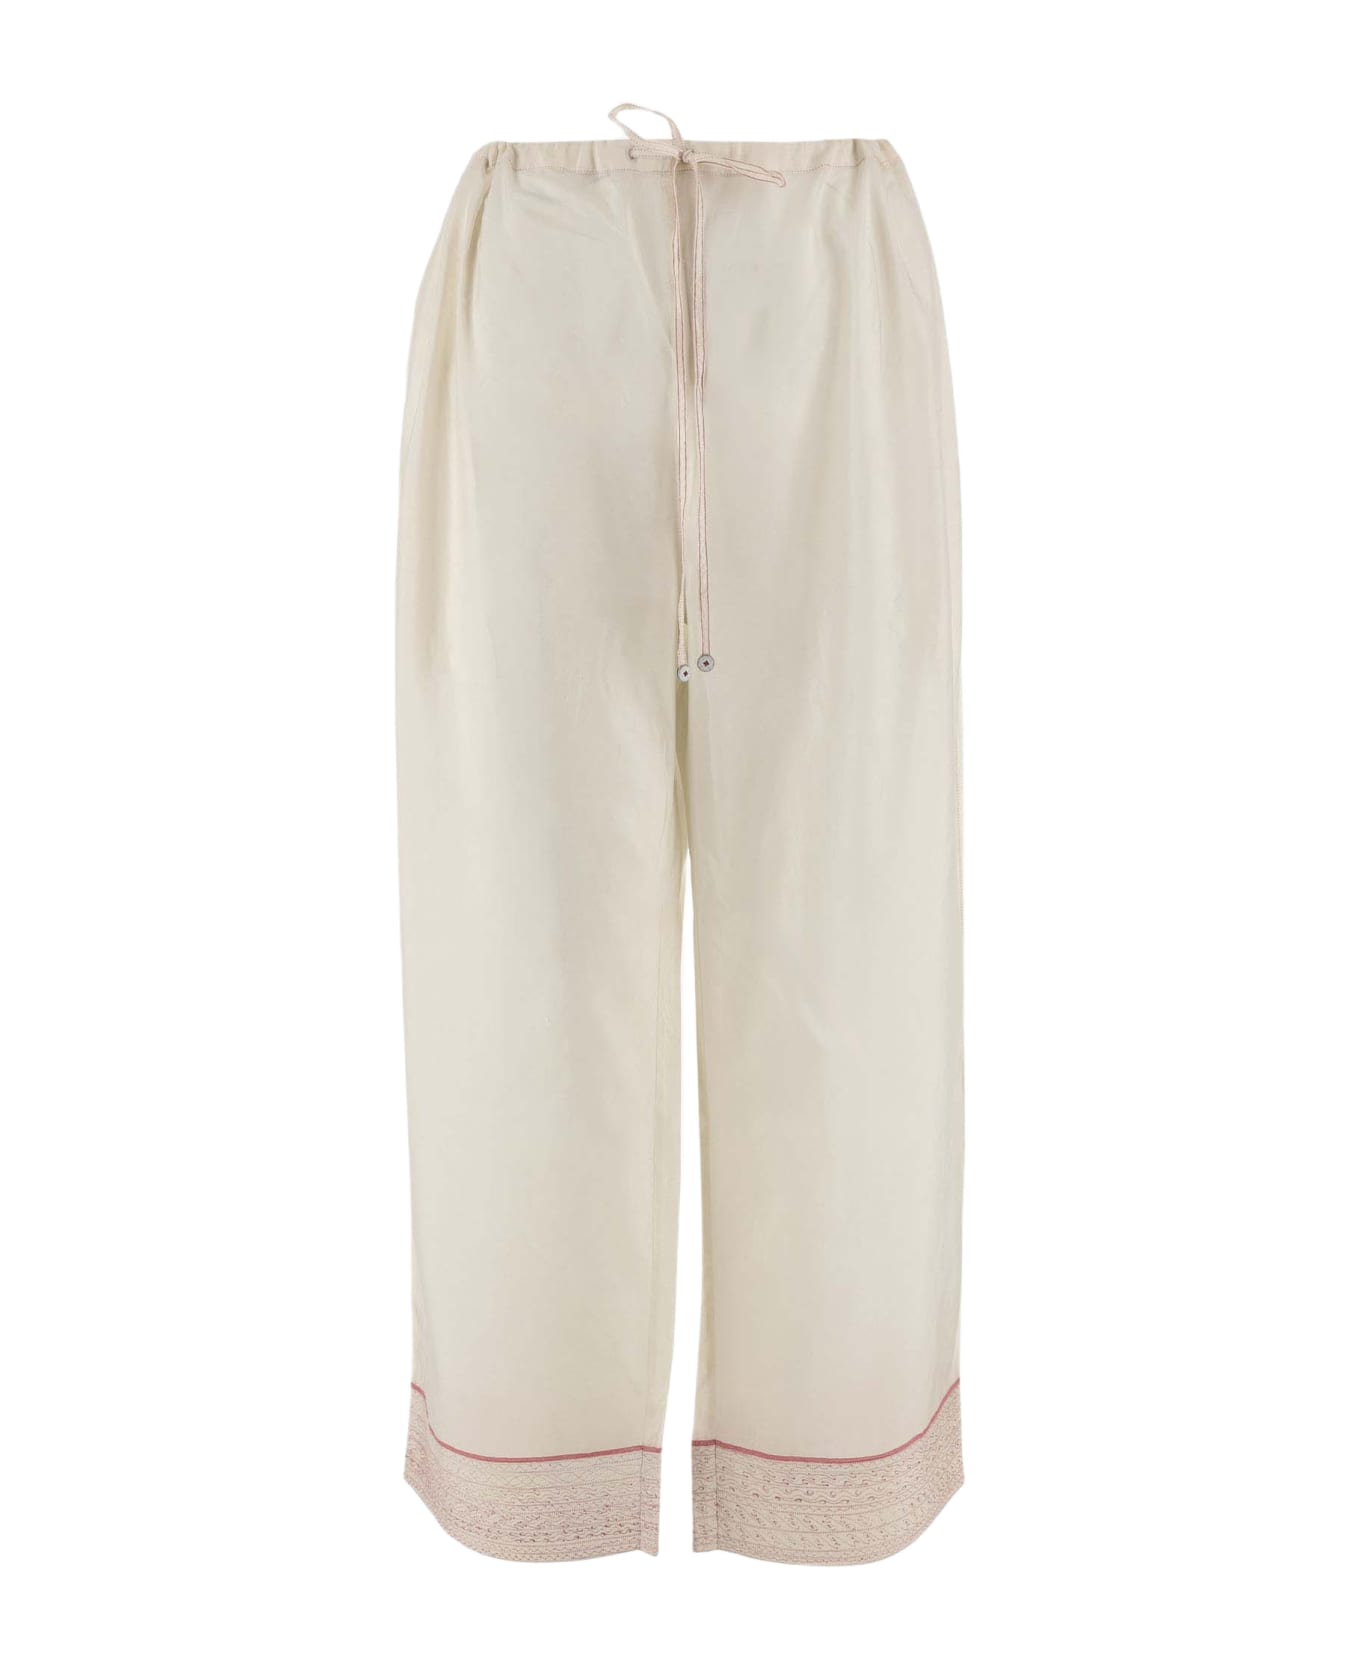 Péro Pants Made Of Pure Silk - Ivory ボトムス